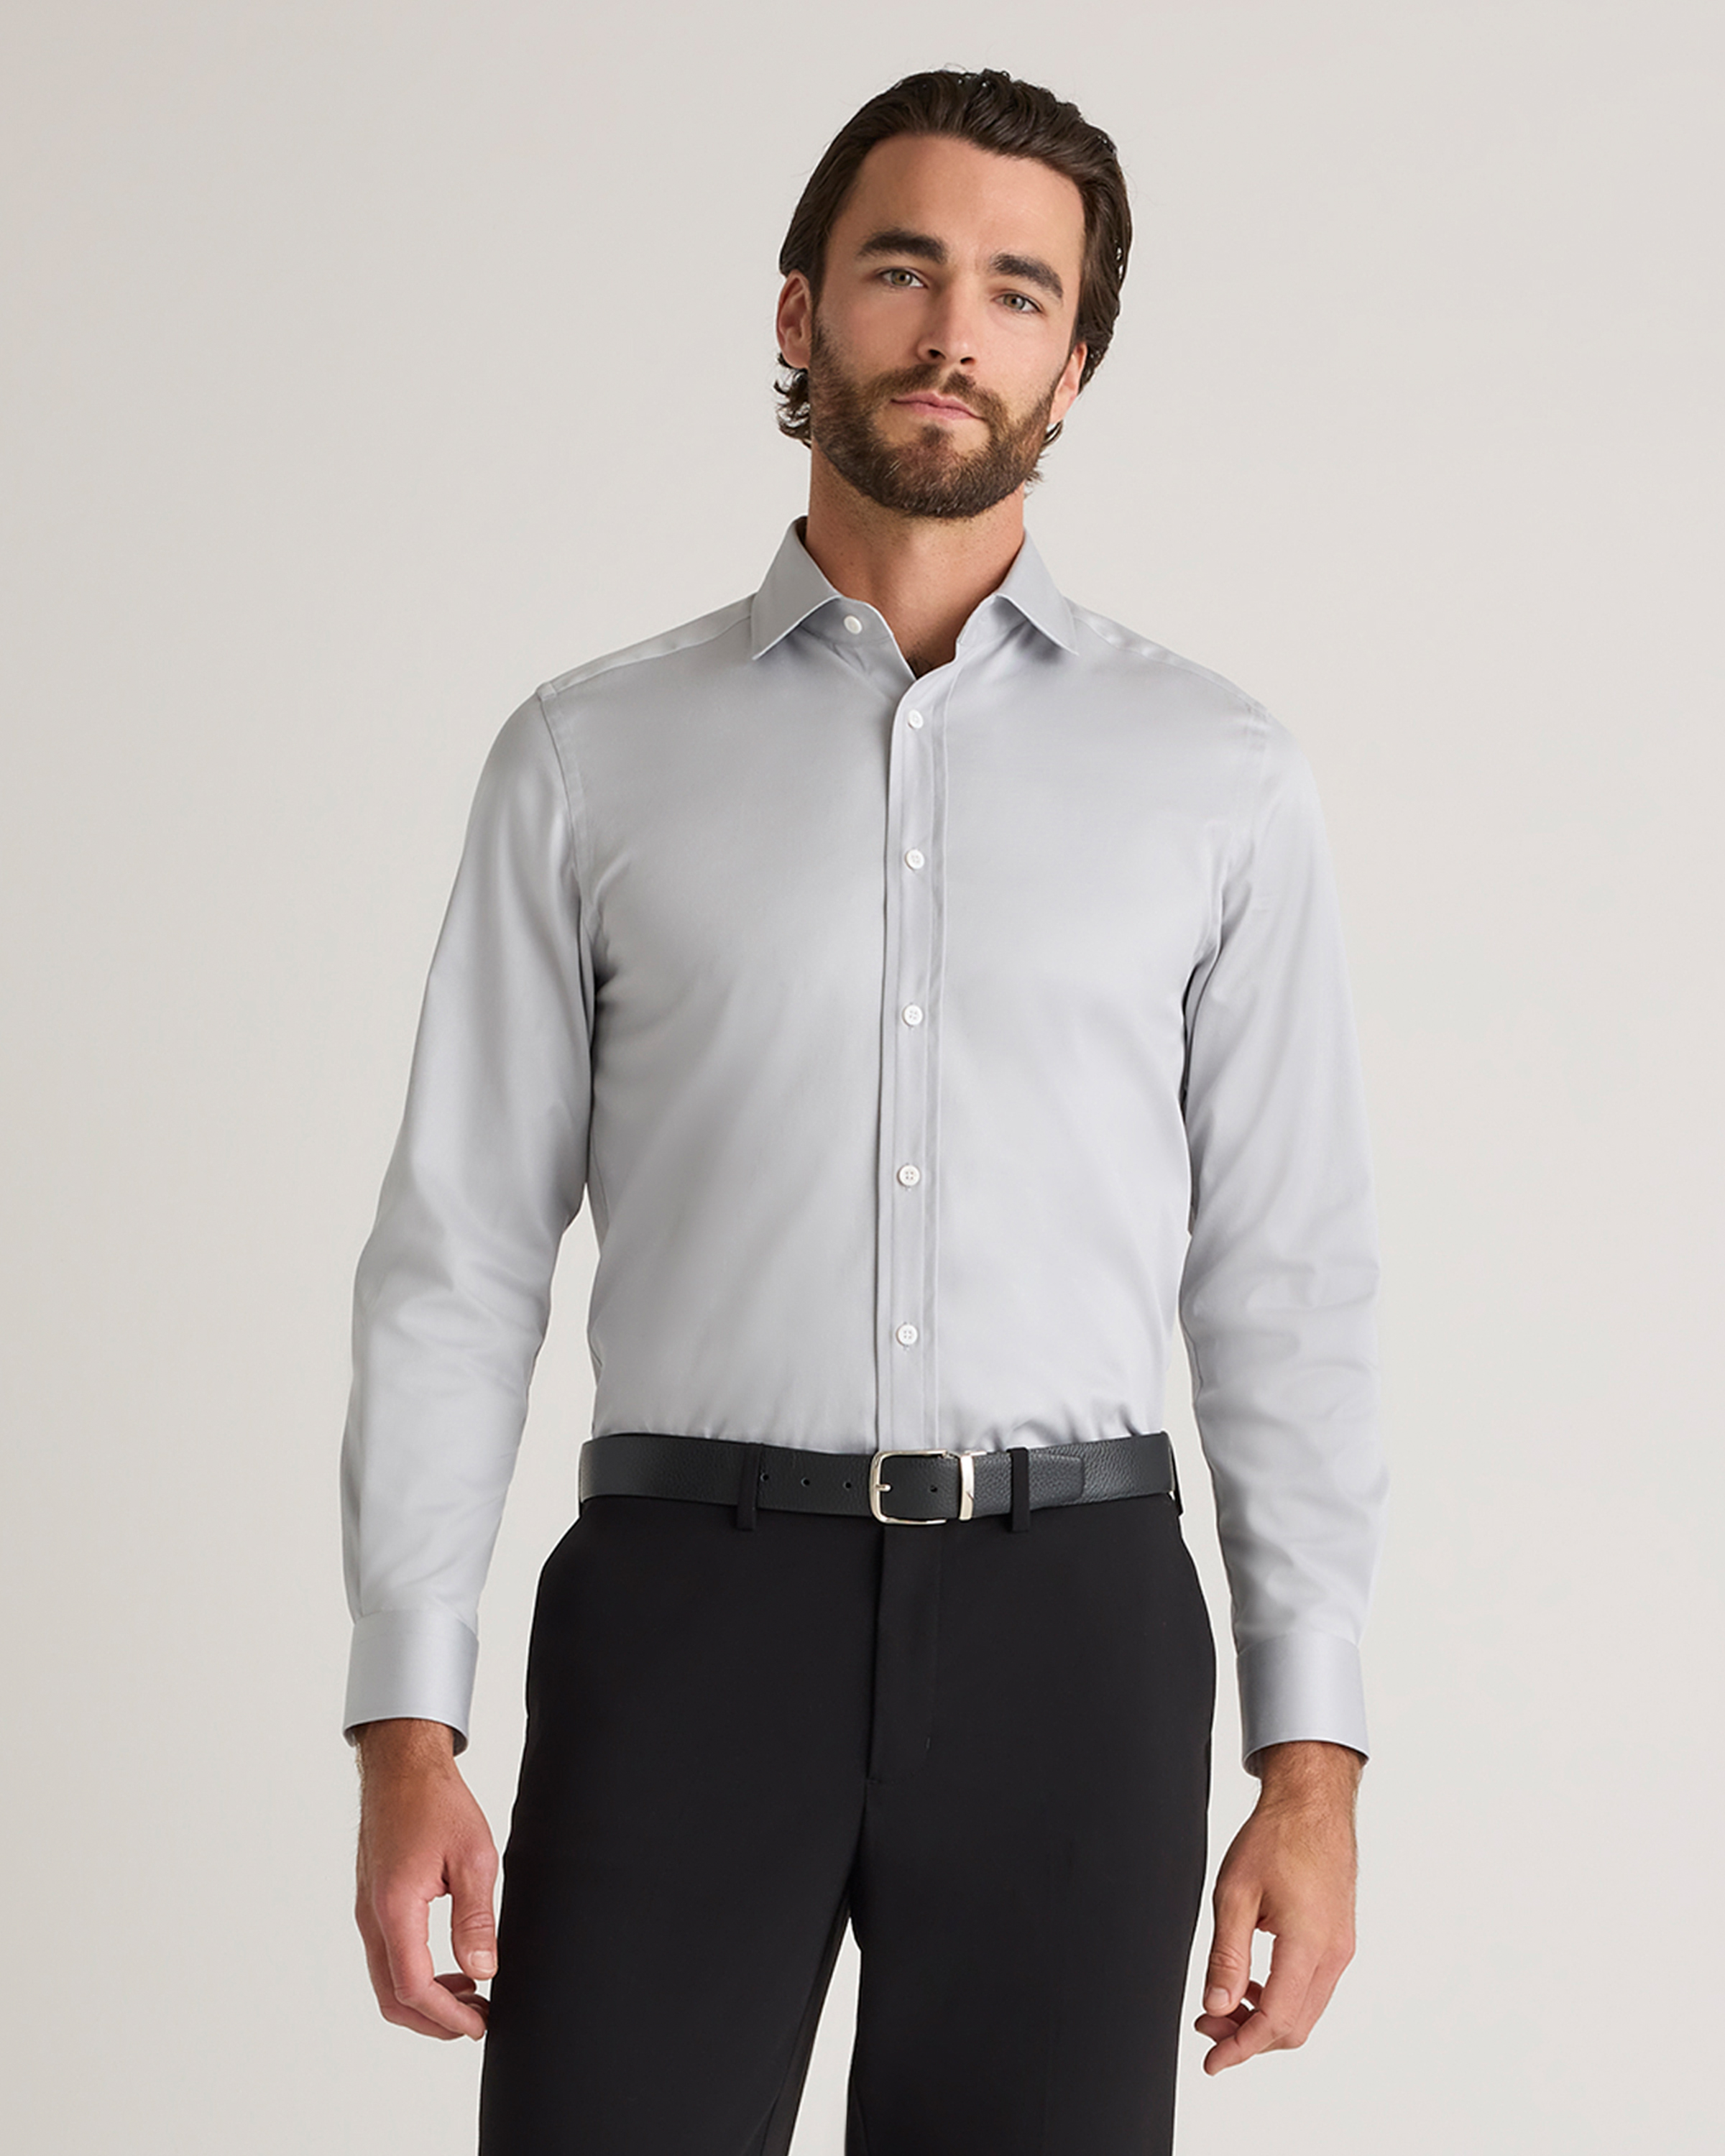 Quince Men's Stretch Twill Dress Shirt In Gray